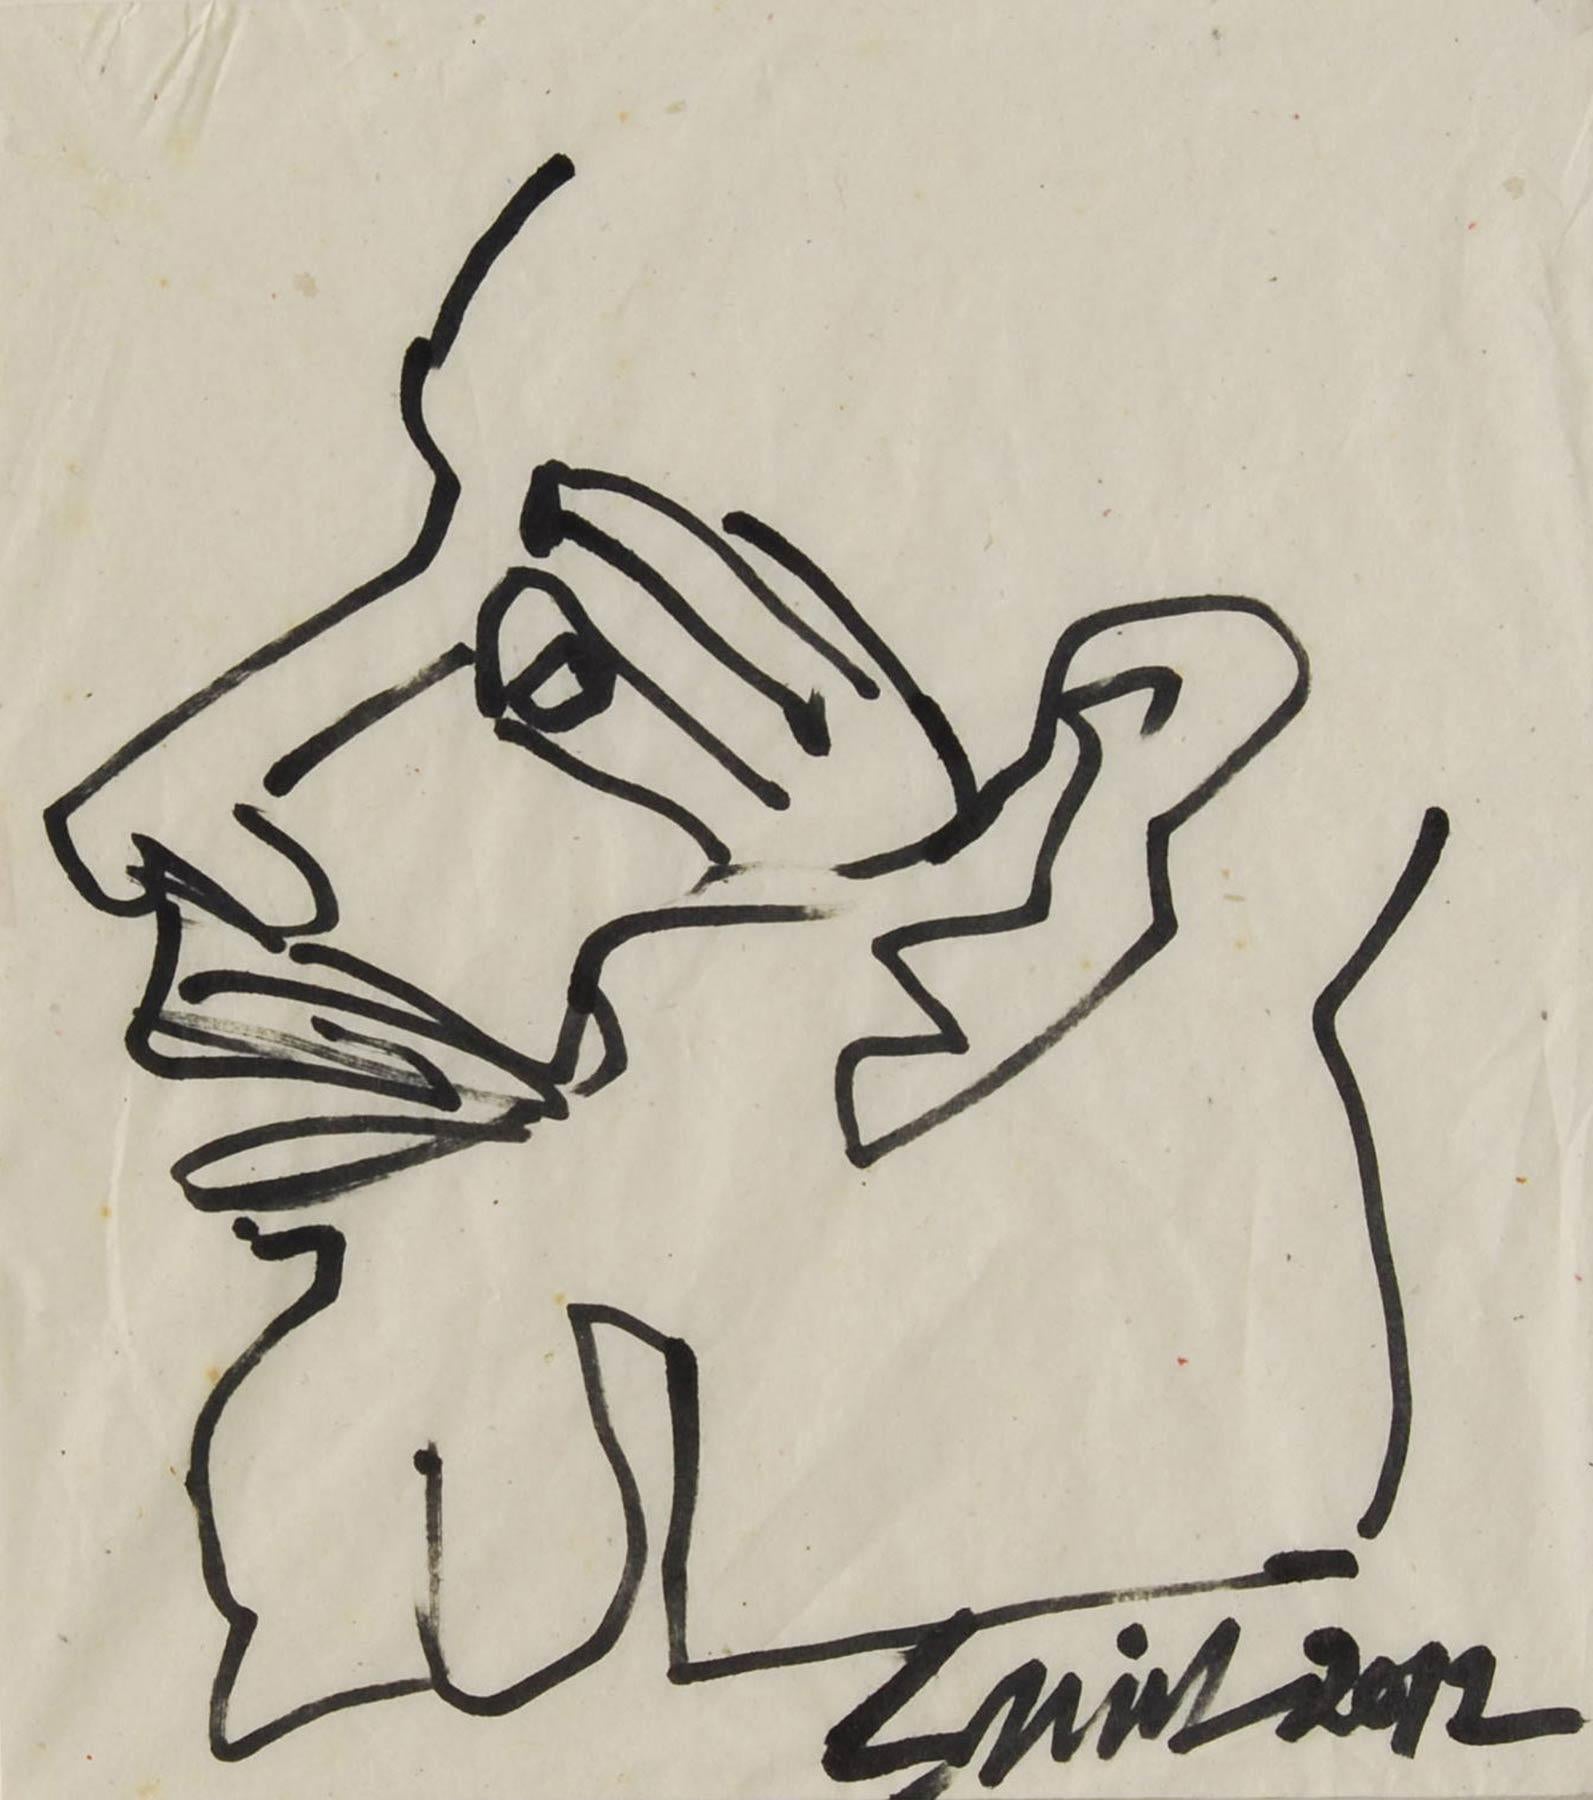 Sunil Das - Head - 7 x 6 inches (unframed size)
Ink on Conte Paper
Inclusive of shipment in ready to hang form.

Sunil Das (1939-2015) was a Master Modern Indian Artist from Bengal. Extremely successful right from his college days, Sunil Das has